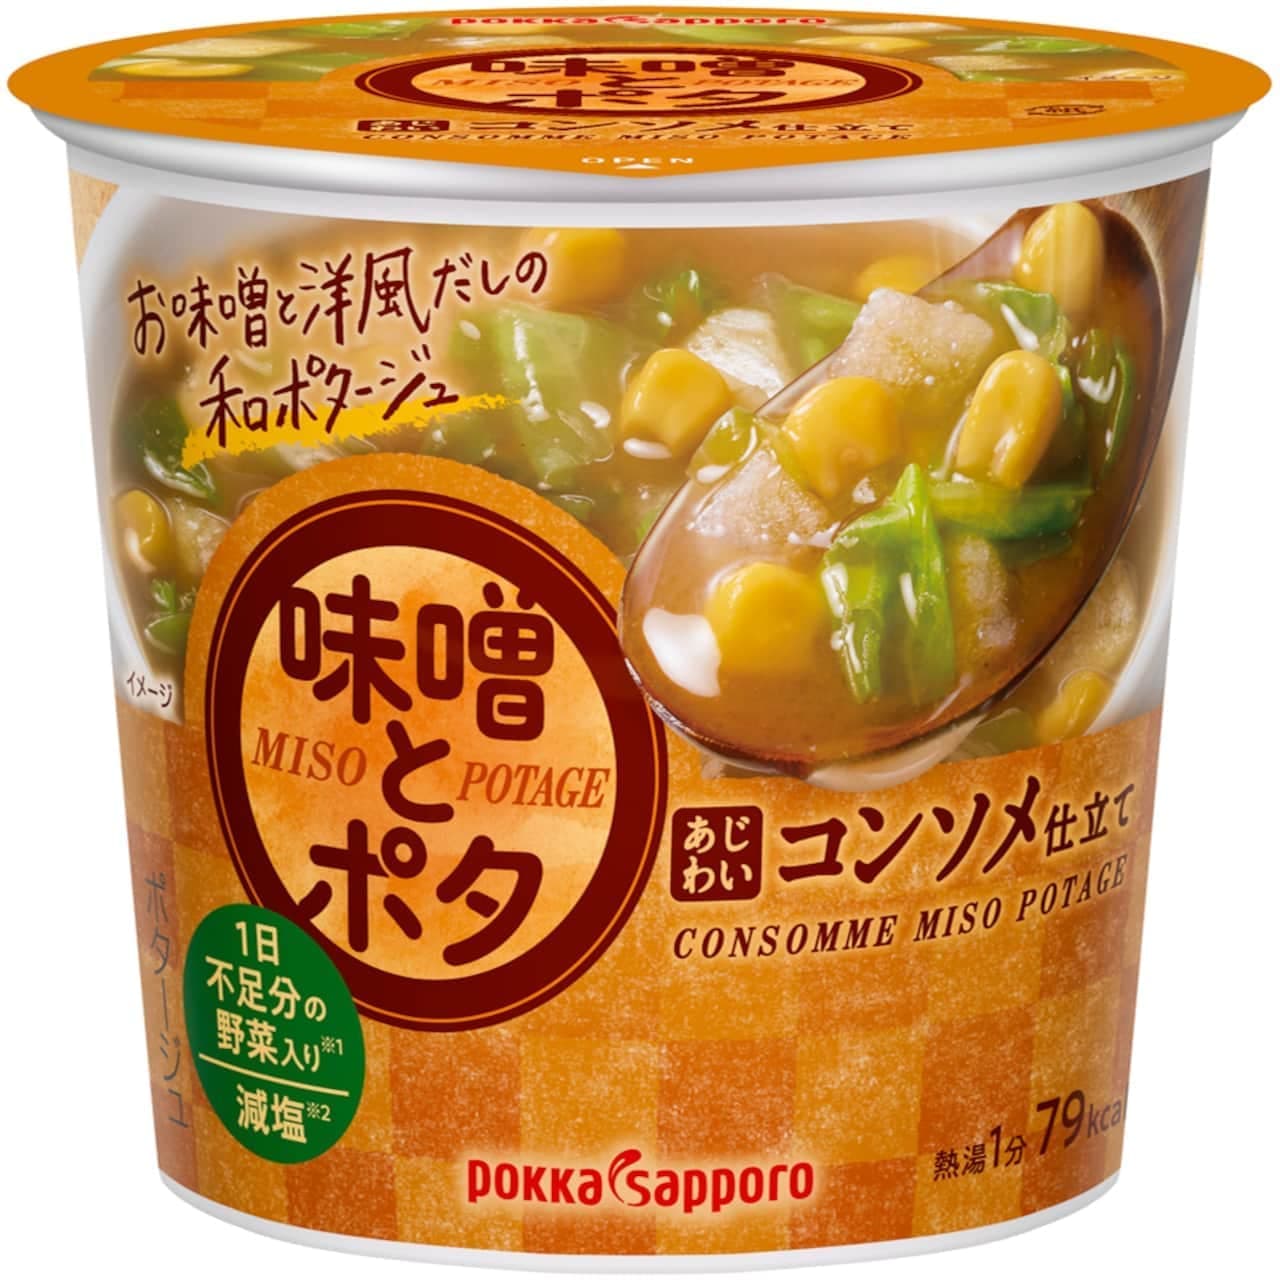 Cup soup "Miso and Pota" Japanese-style potage of miso and Western-style dashi